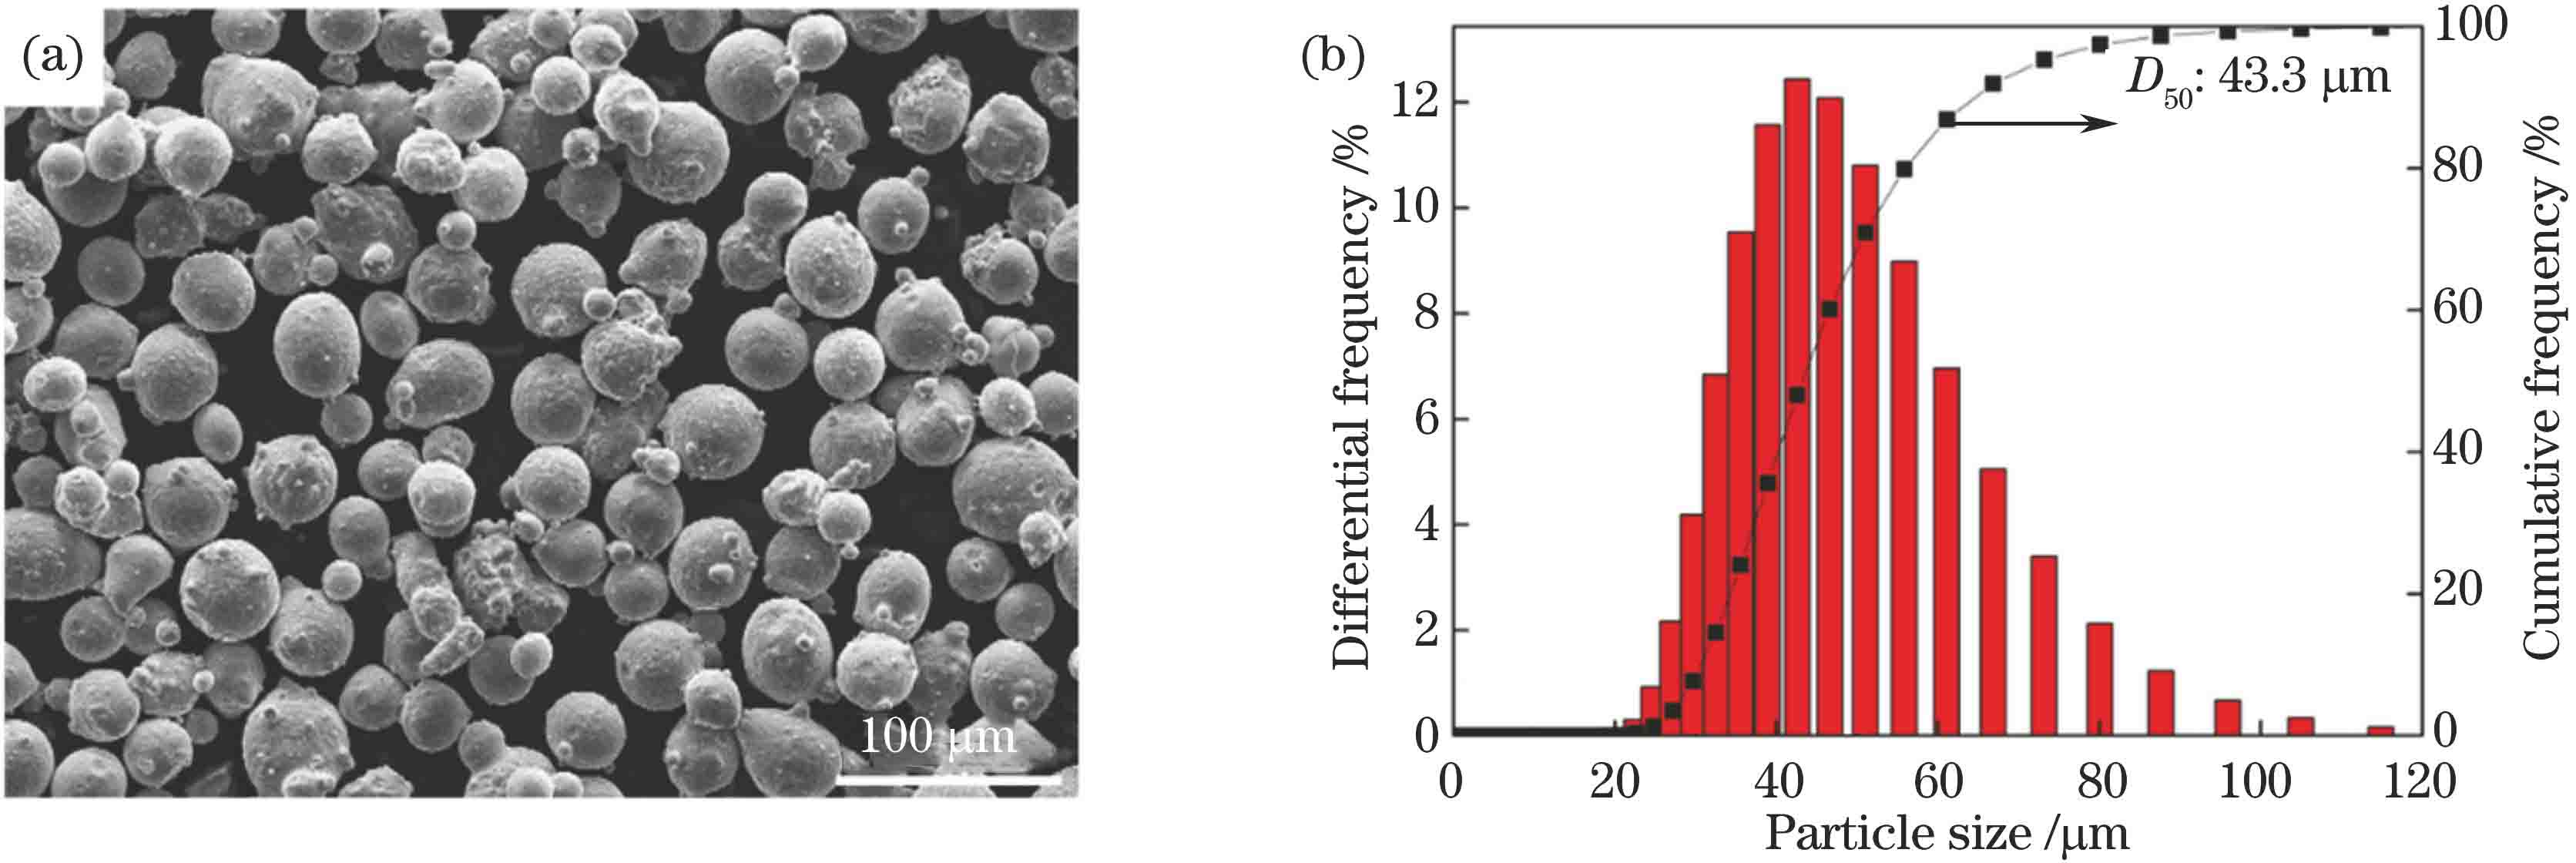 Morphology and particle size distribution of 24CrNiMo alloy steel powder. (a) Morphology; (b) particle size distribution